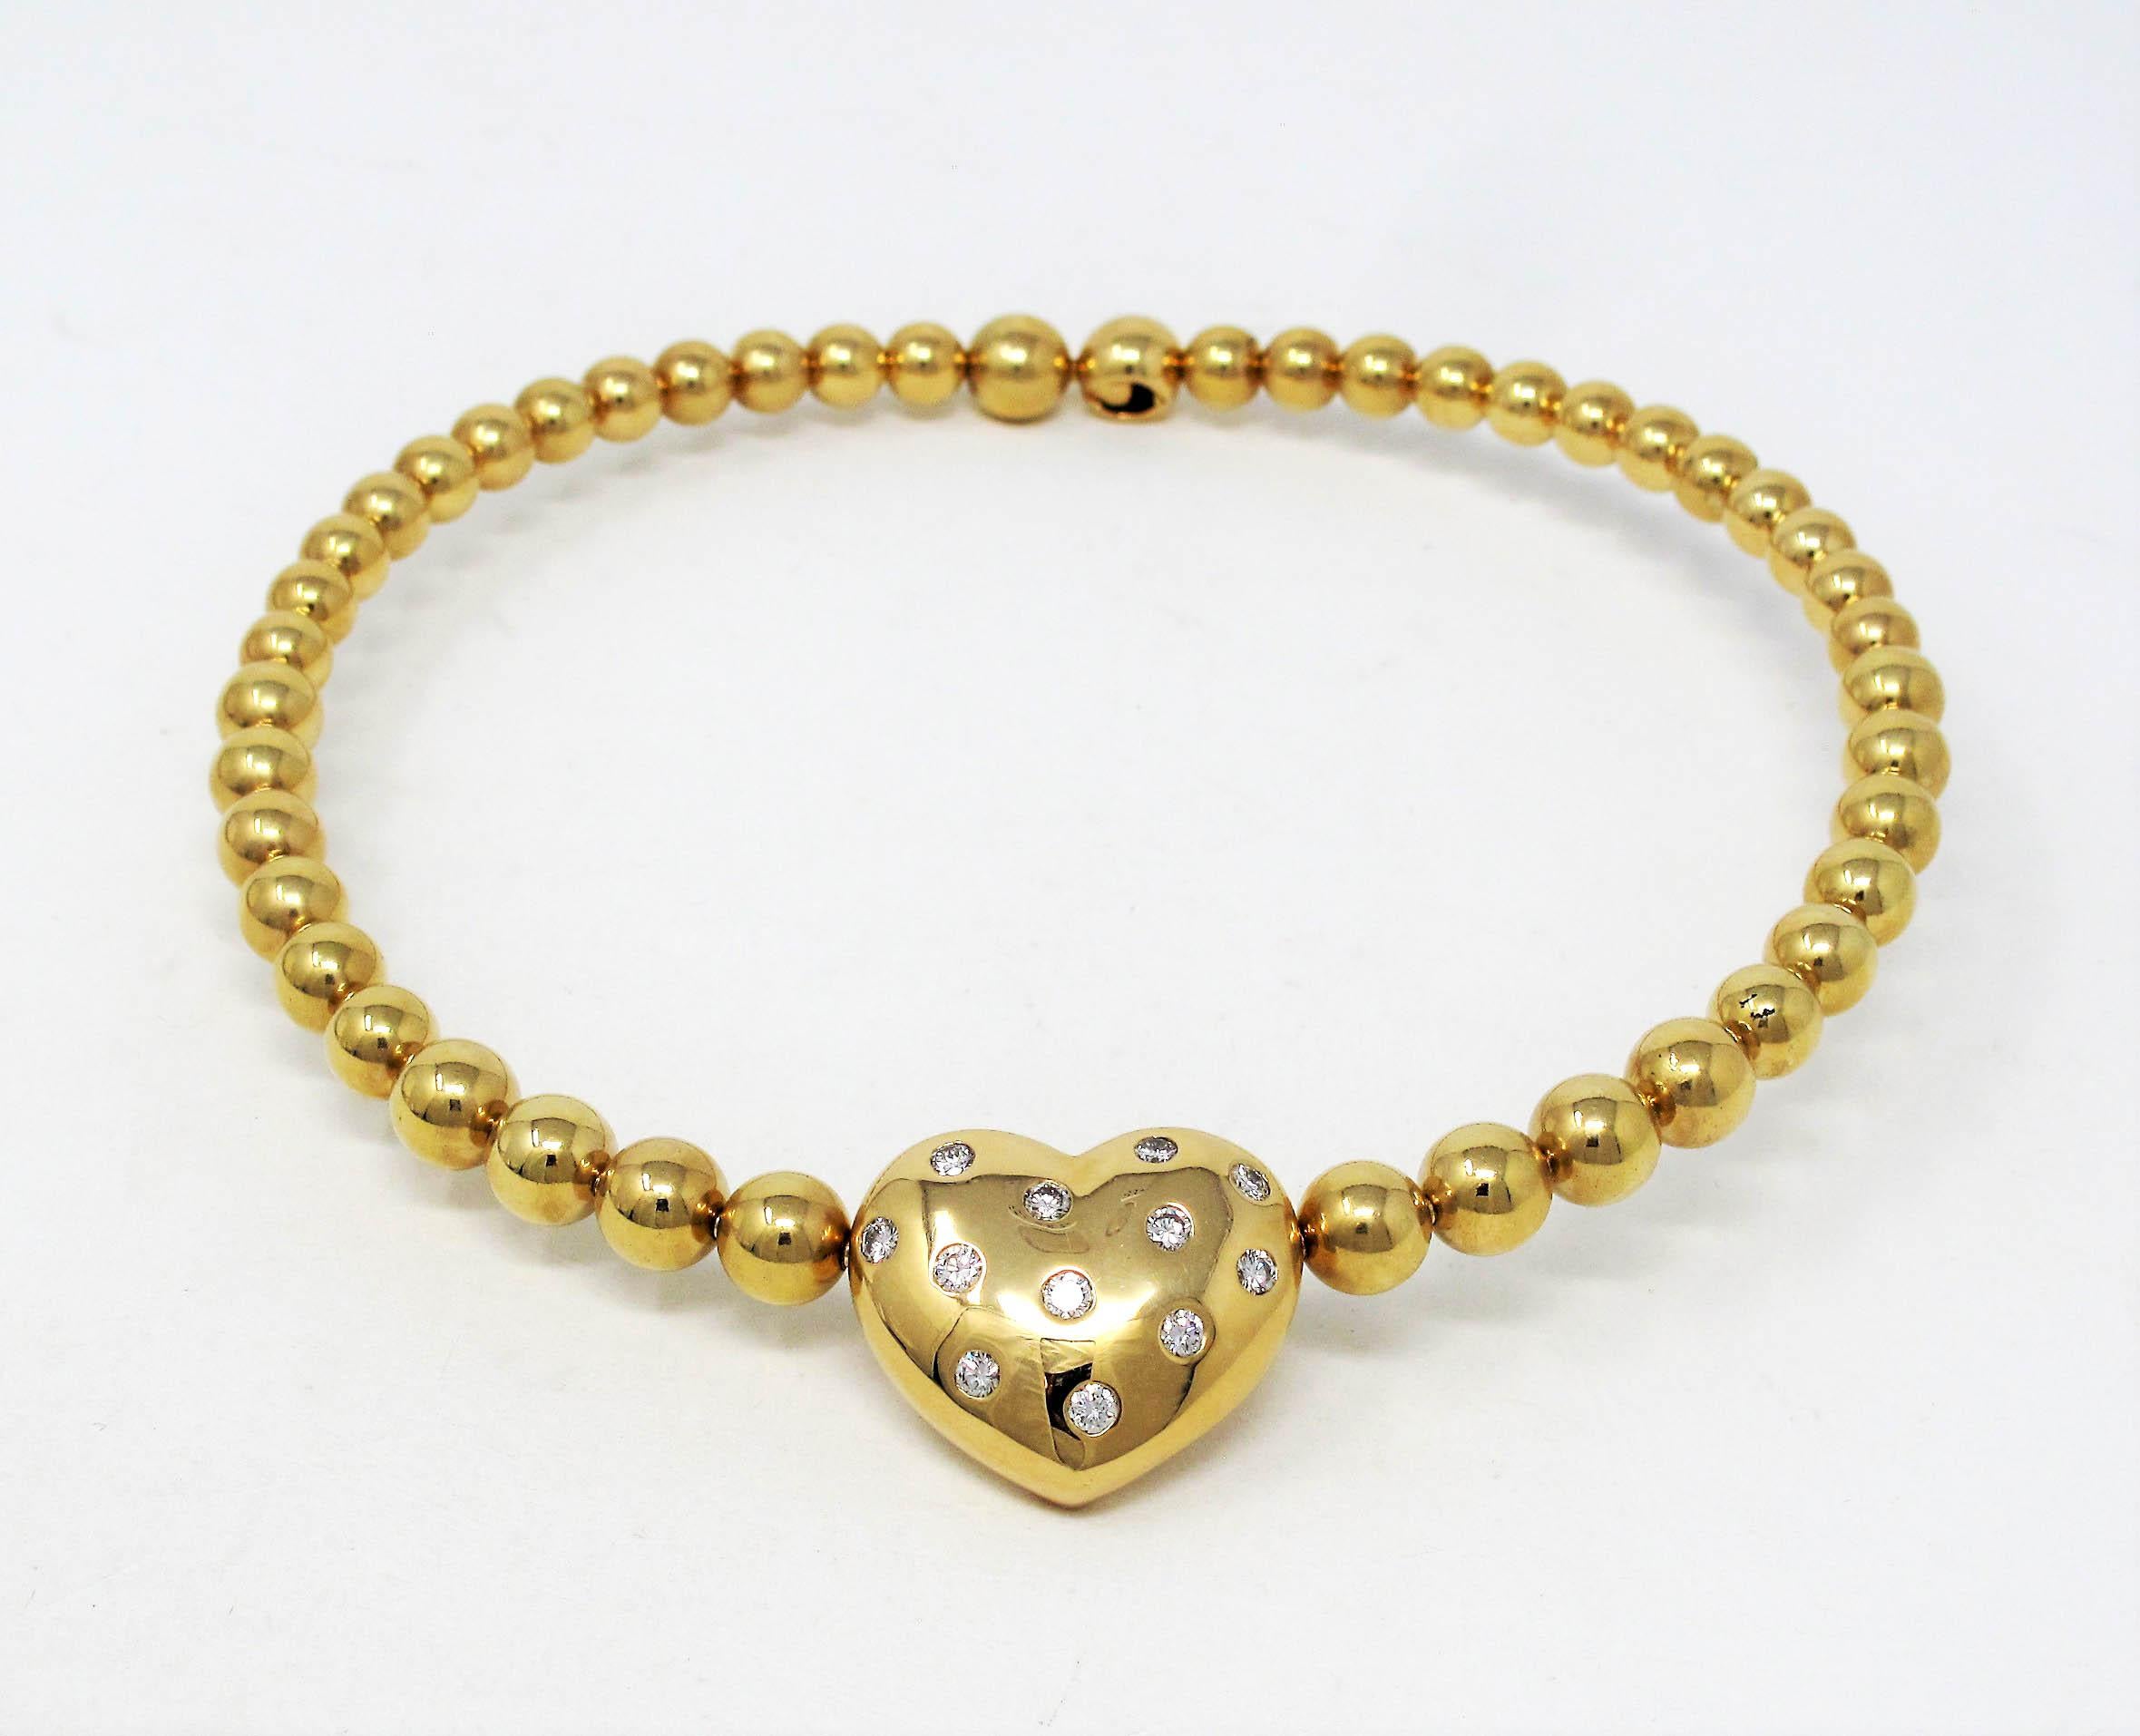 Romantic gold and diamond heart choker necklace absolutely radiates on the neck. This stunning Jean Vitau design gives an elegant, ultra-feminine feel with its glimmering diamonds and flattering tapered shape. This necklace is sure to